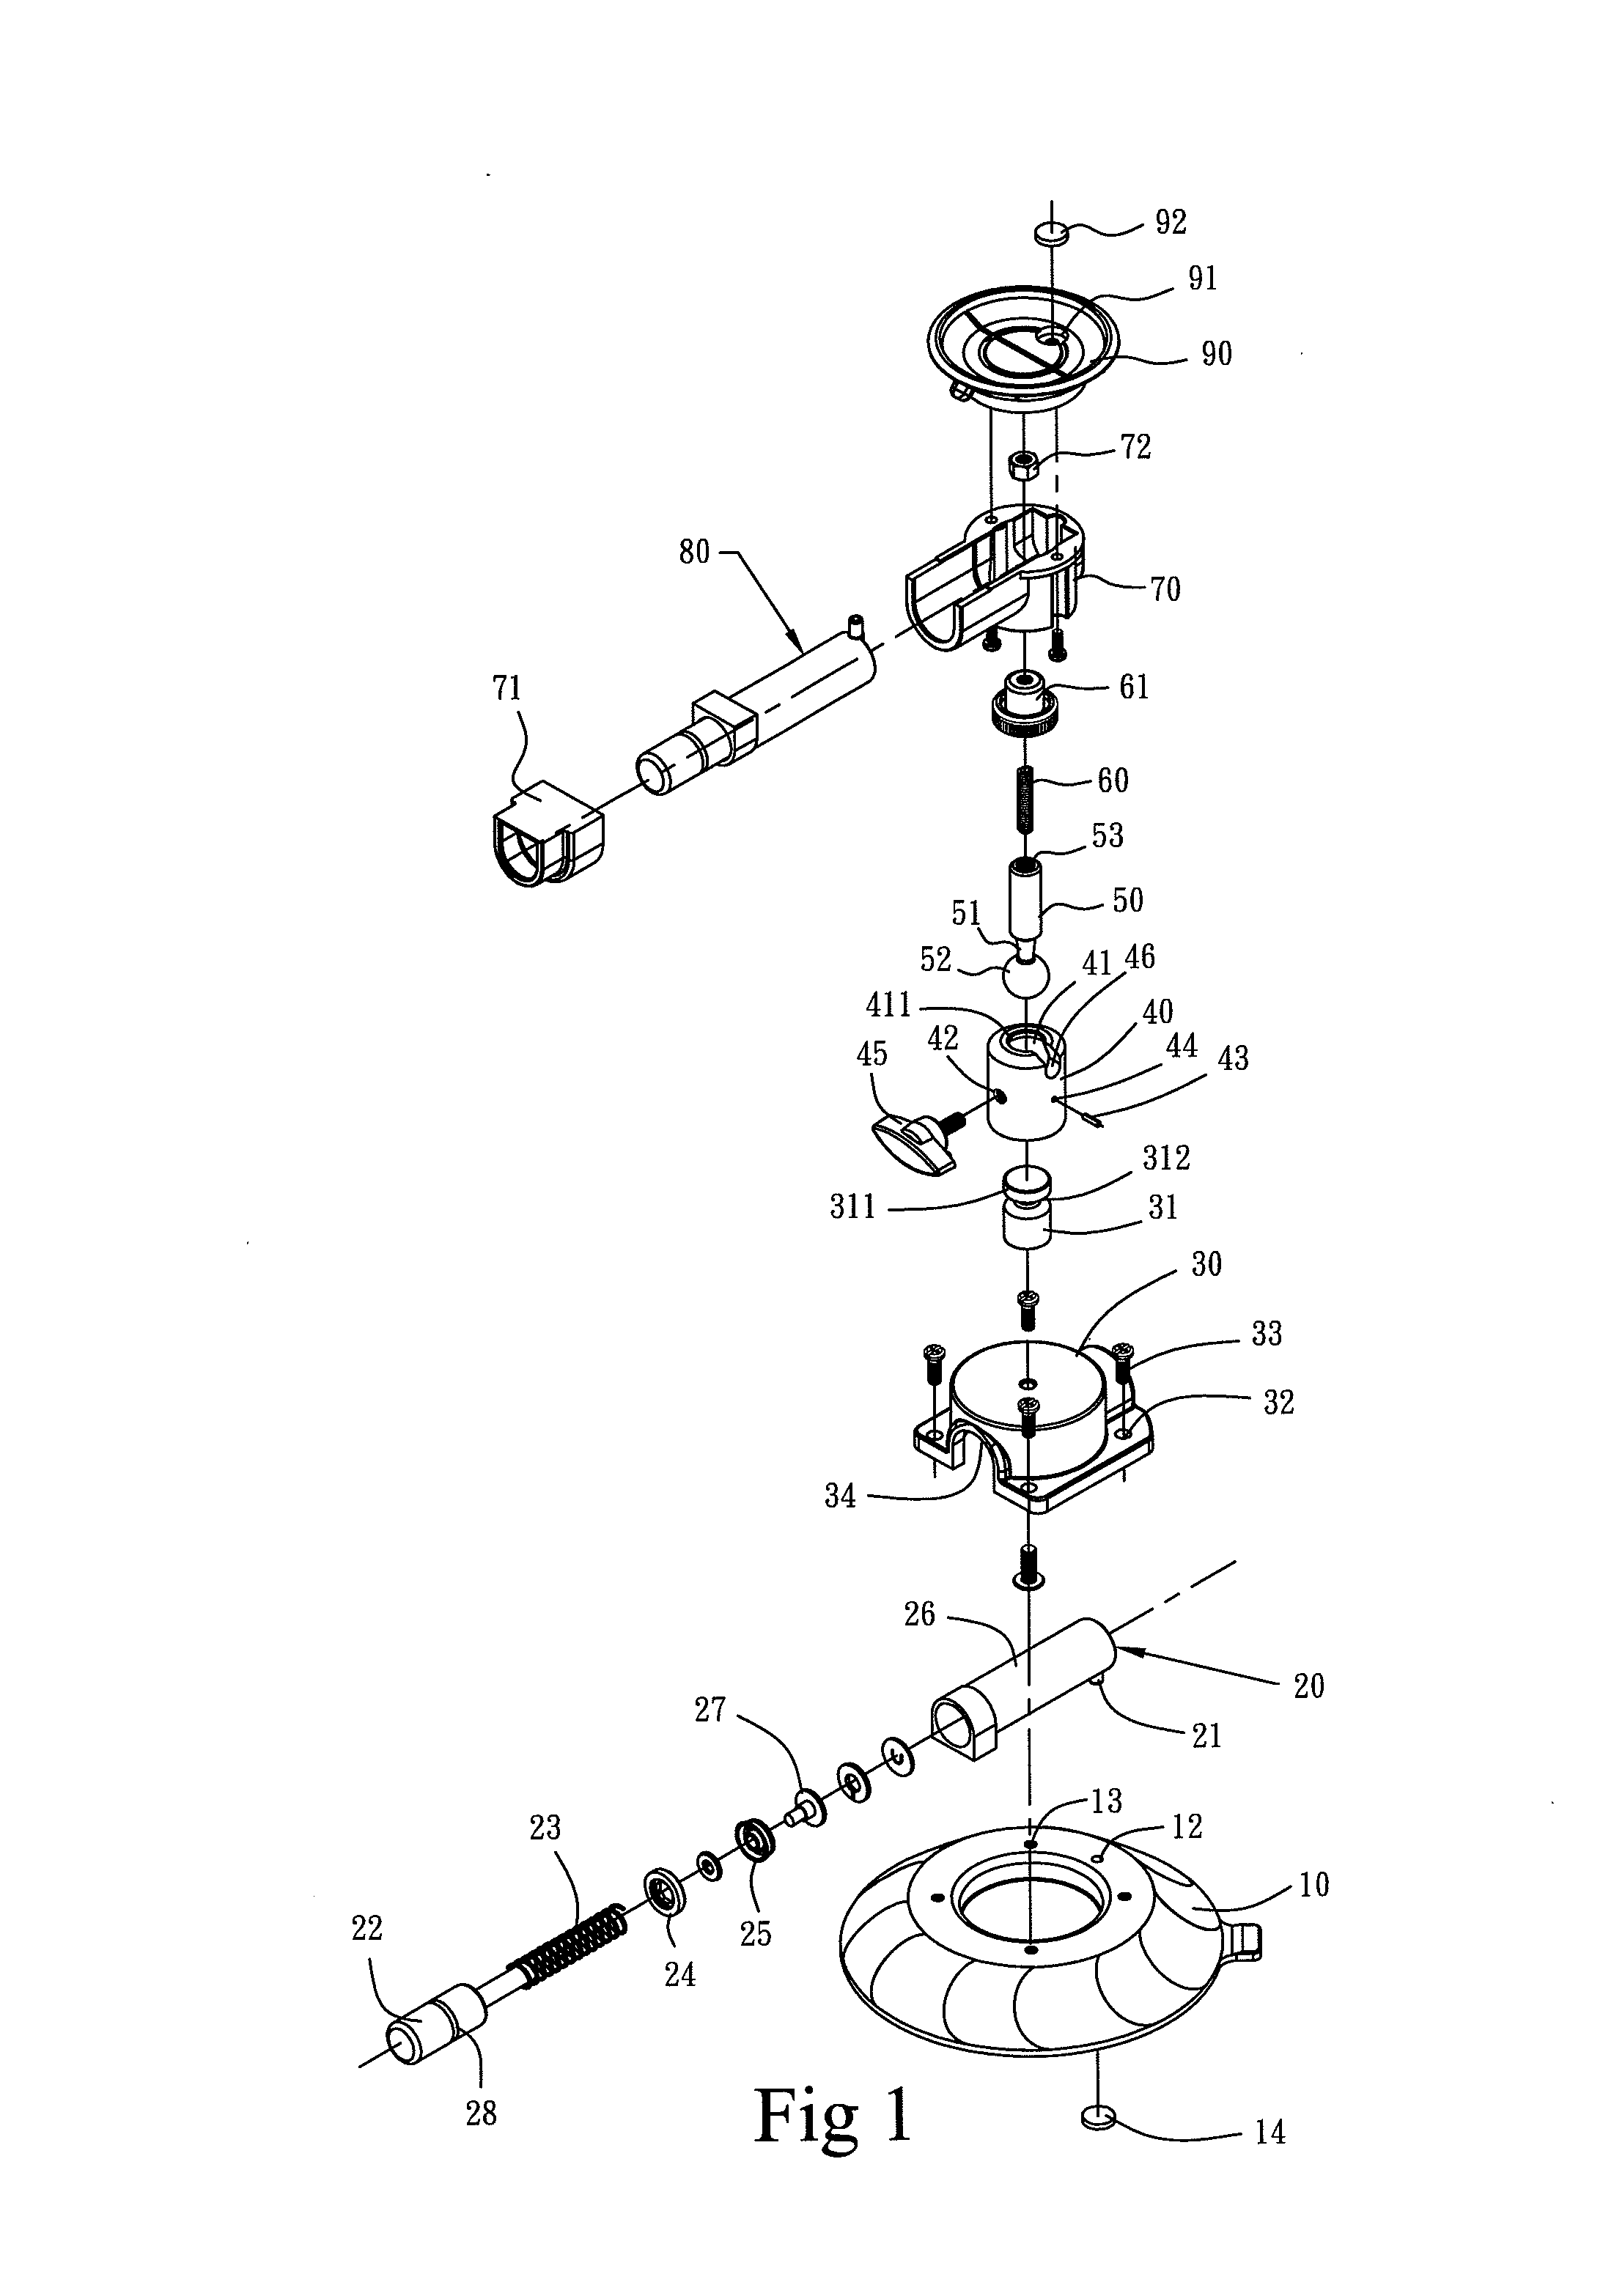 Omni-direction rotatable dual-cup suction device